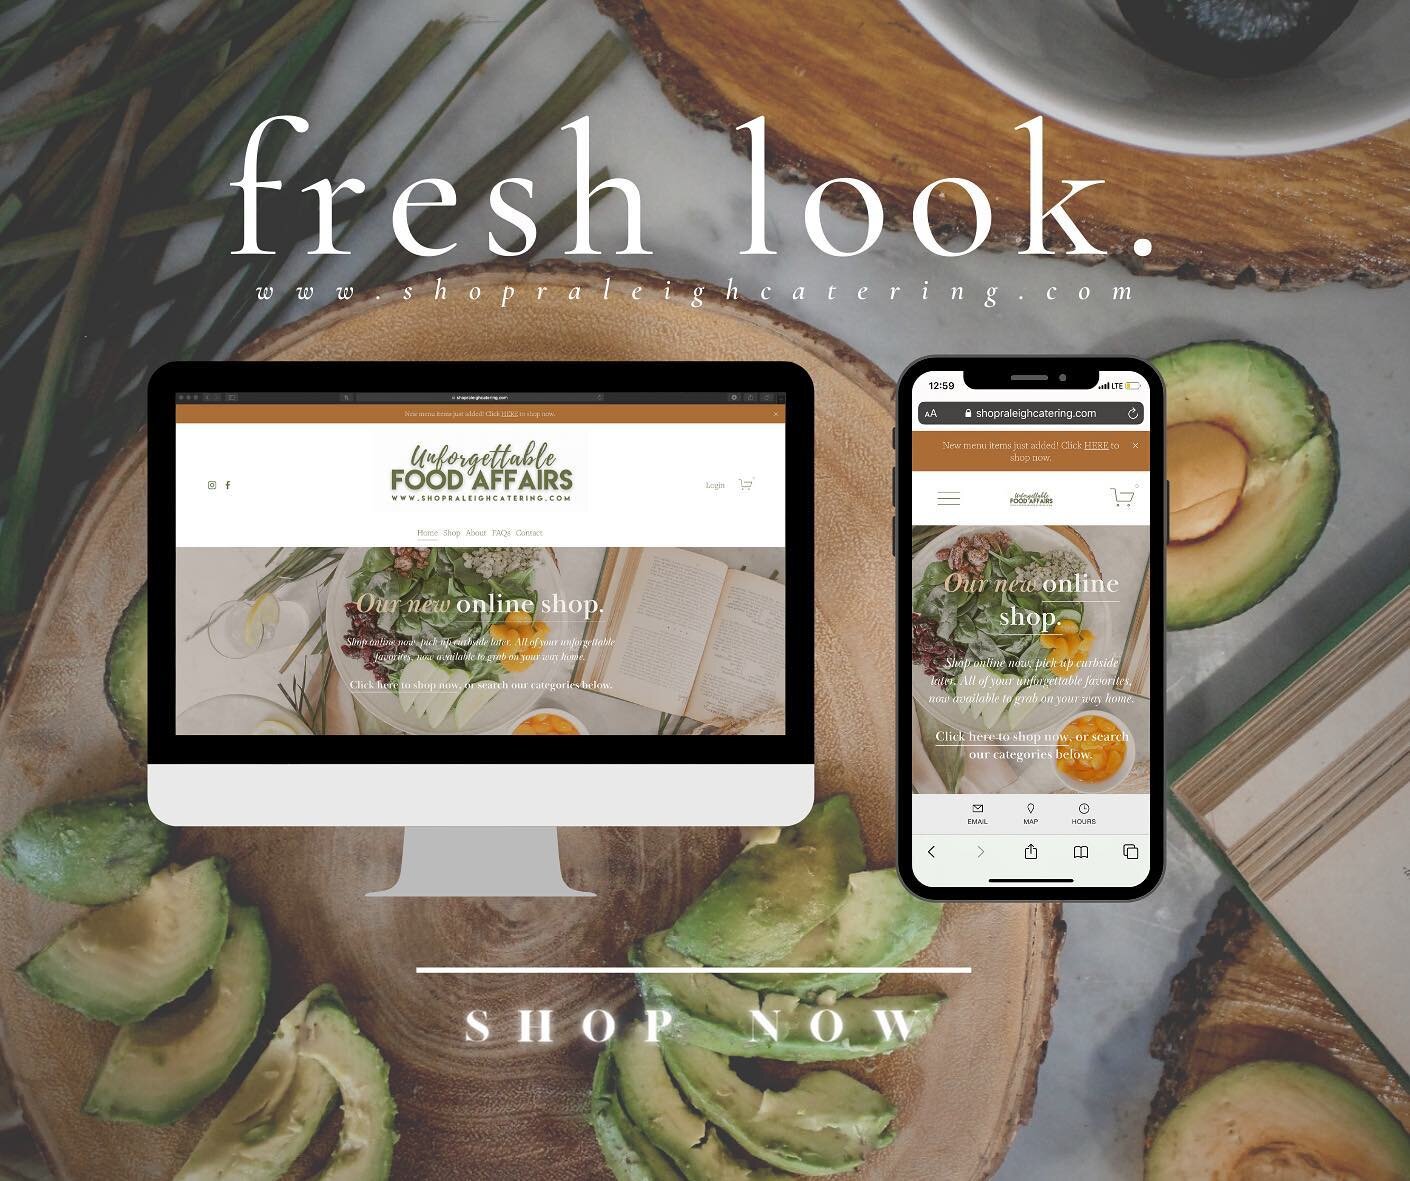 Have you seen the new look? Our designer at @fabbcreativestudio has been keeping the site fresh and looking new just for you! We love changing things up from time to time and continuing to deliver the best platform for our customers to order on.

W